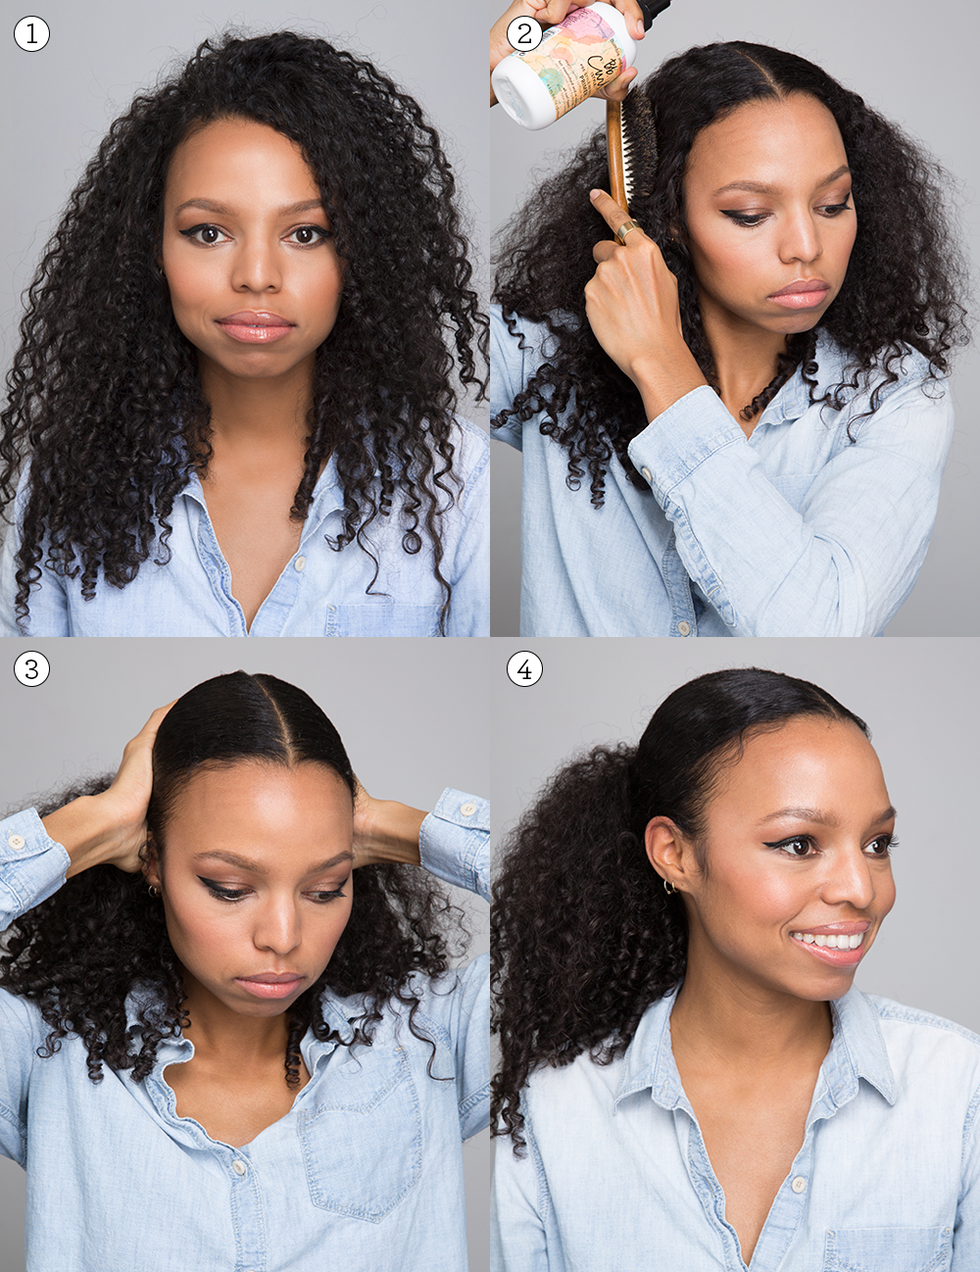 7 Best Curly Hair Haircuts & Hairstyles to Enhance Your Curls